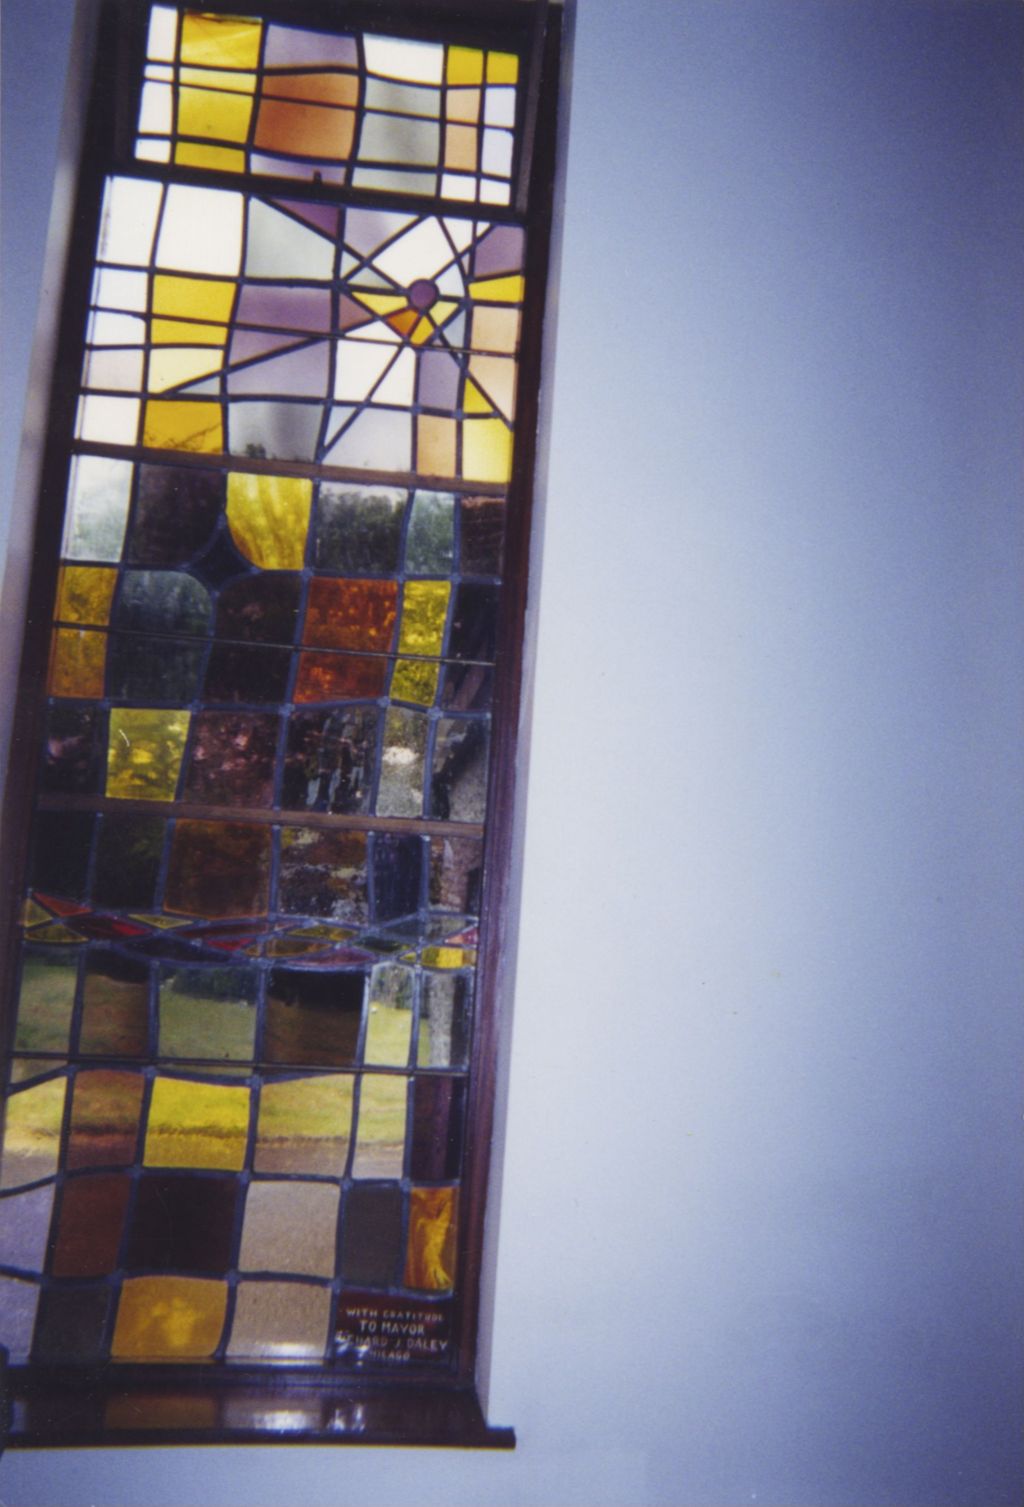 Miniature of Stained glass window in memory of Richard J. Daley in Old Parish Church